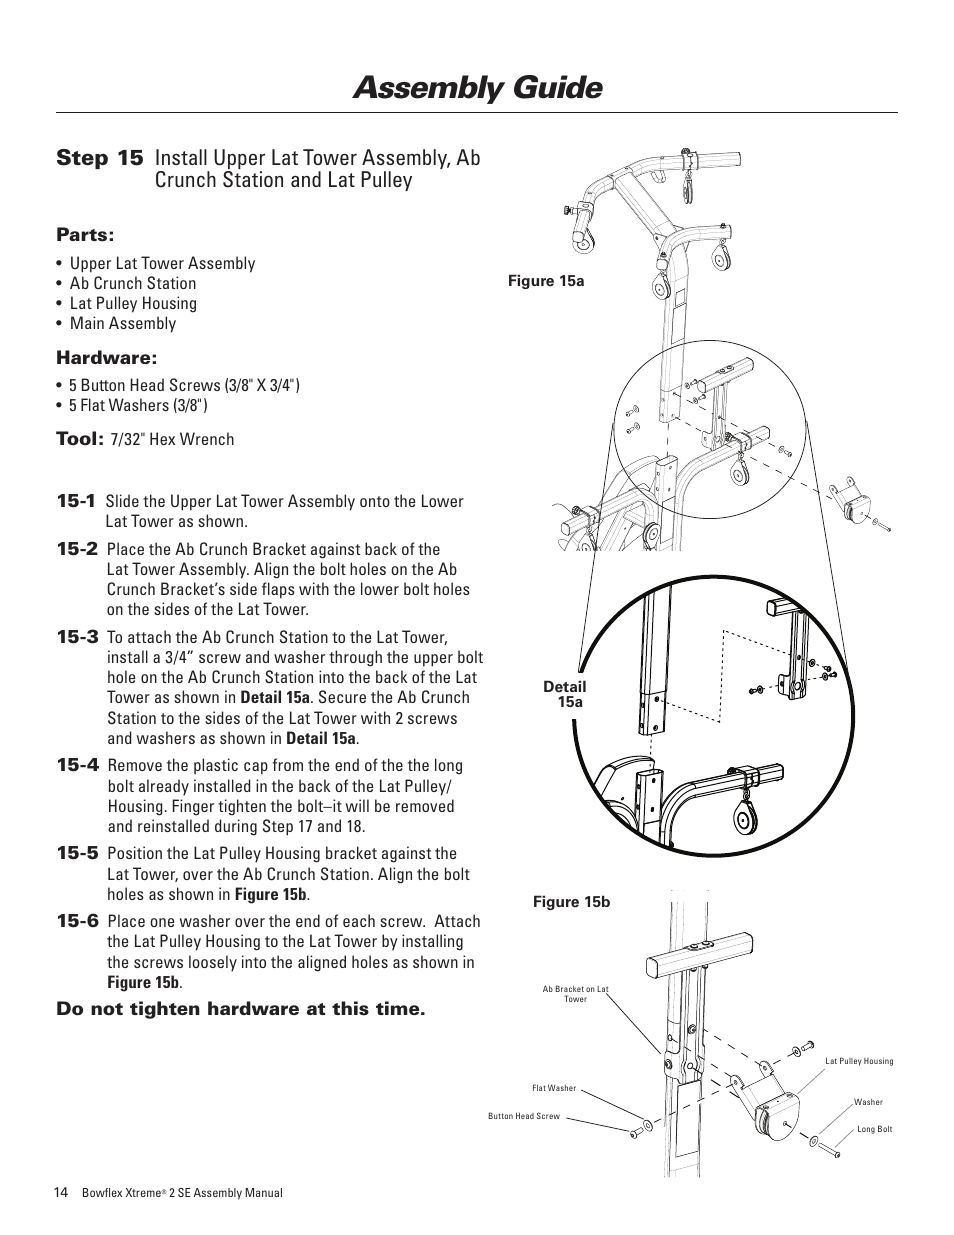 Assembly guide | Bowflex Xtreme 2 SE User Manual | Page 18 / 28